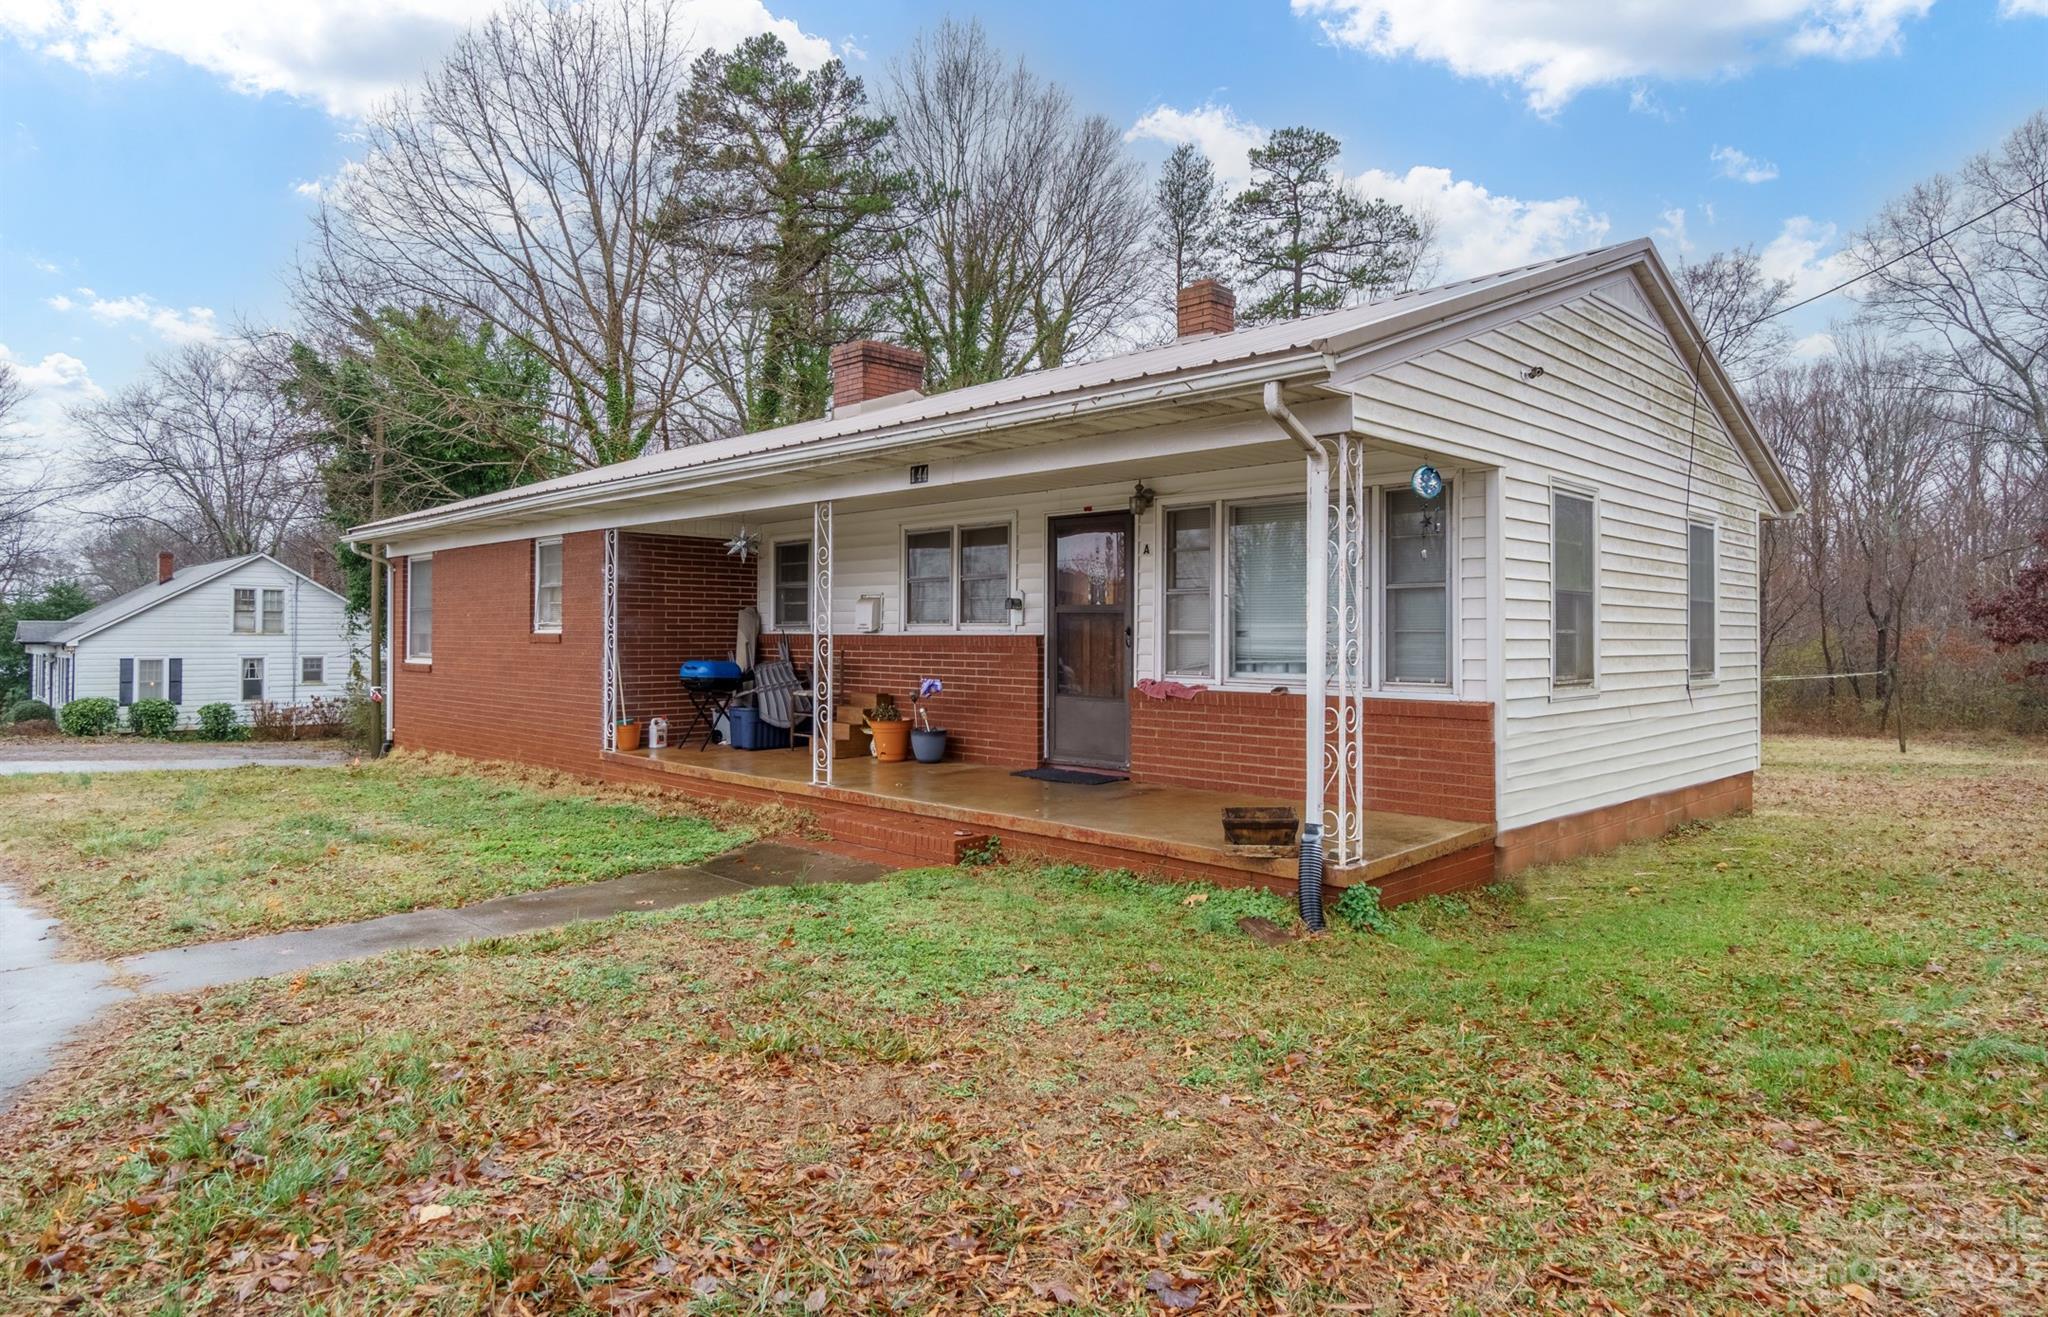 Photo one of 144 Bell Farm Rd Statesville NC 28625 | MLS 4097785